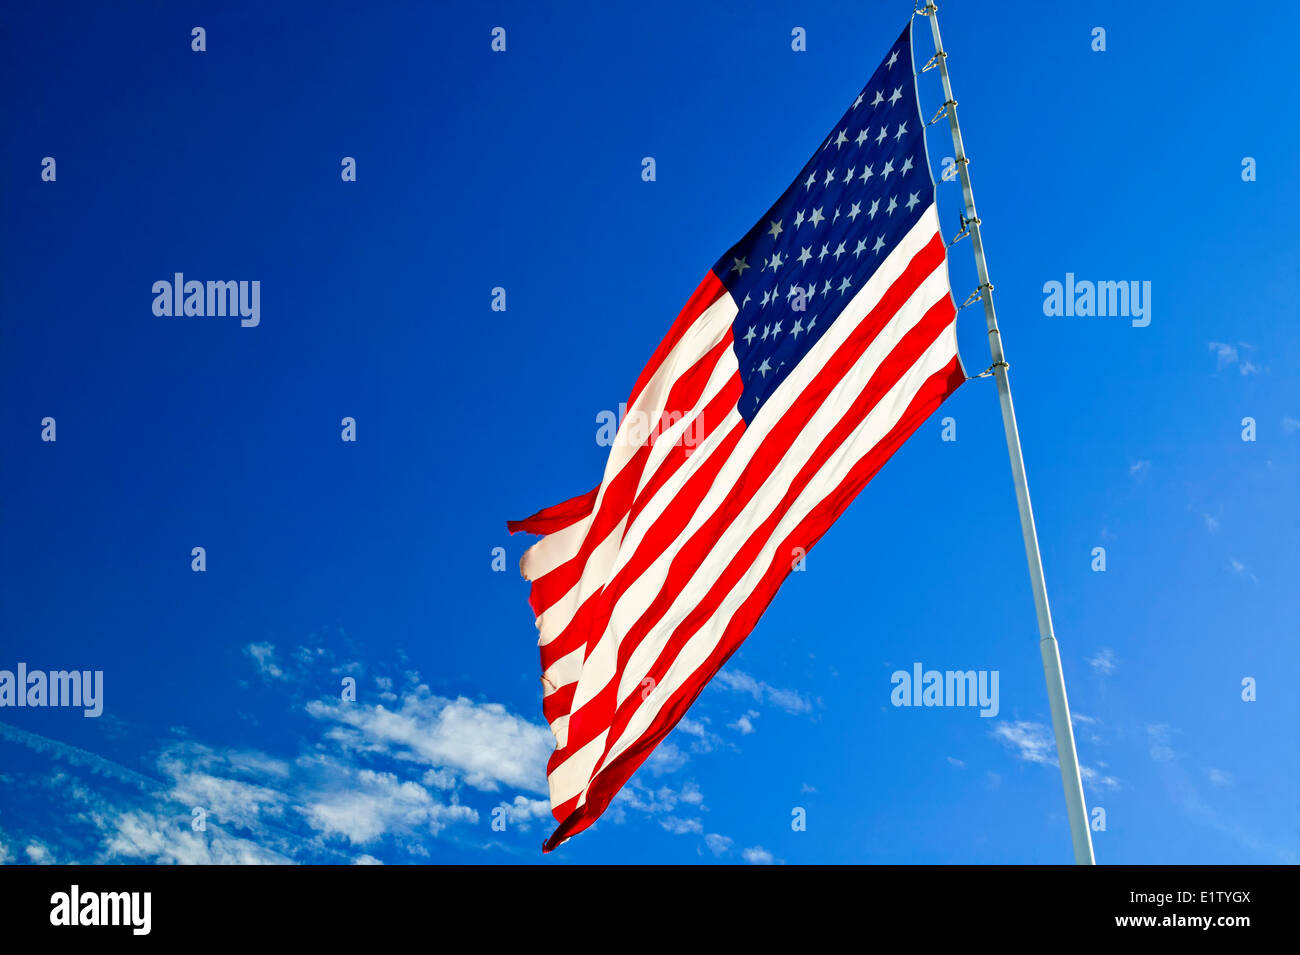 The american flag waving in the wind on a clear blue sky day. Stock Photo